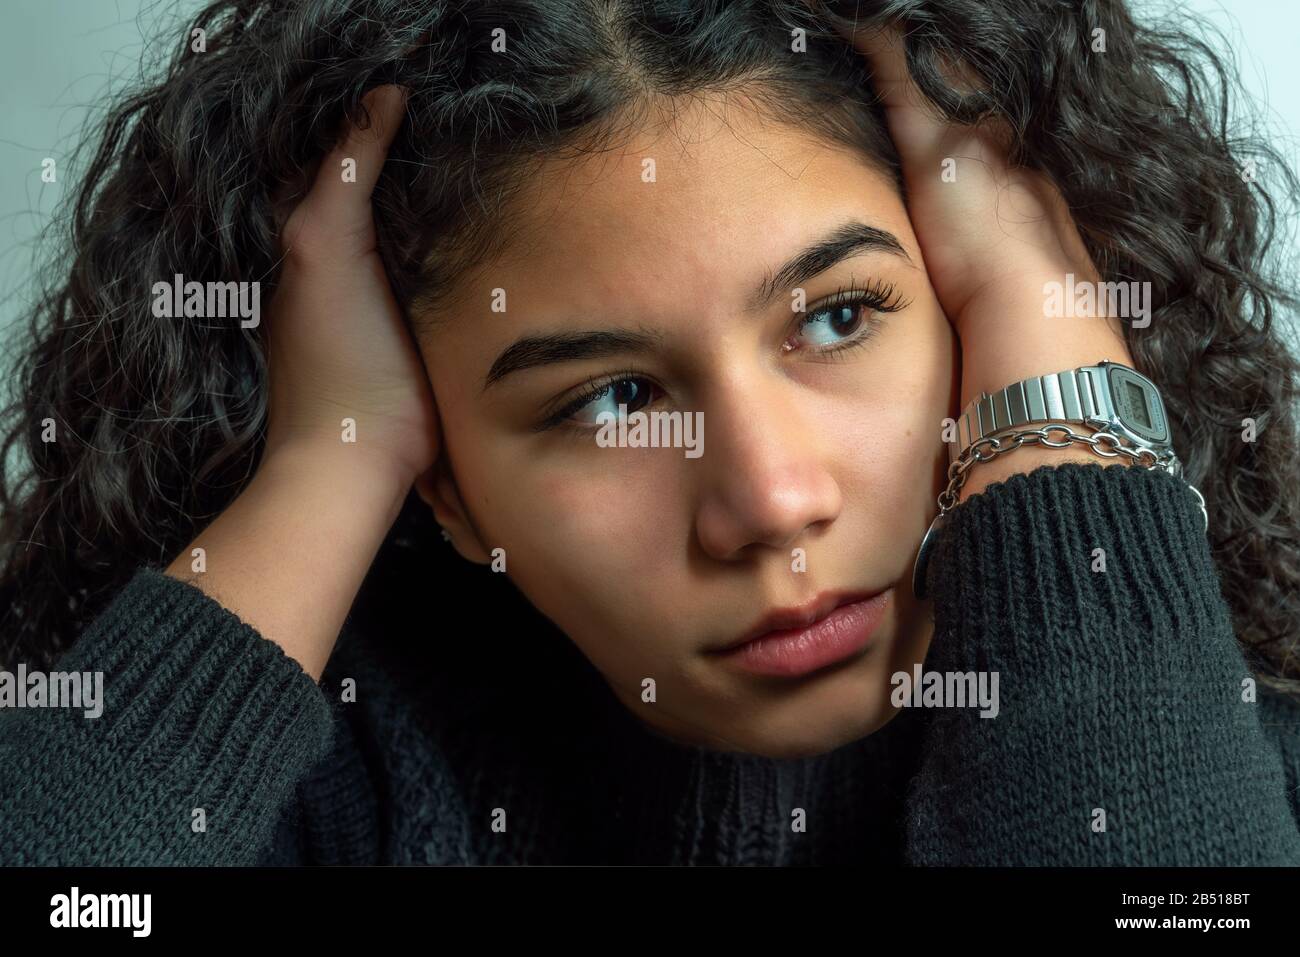 Teenager portrait closeup young woman pensively Stock Photo